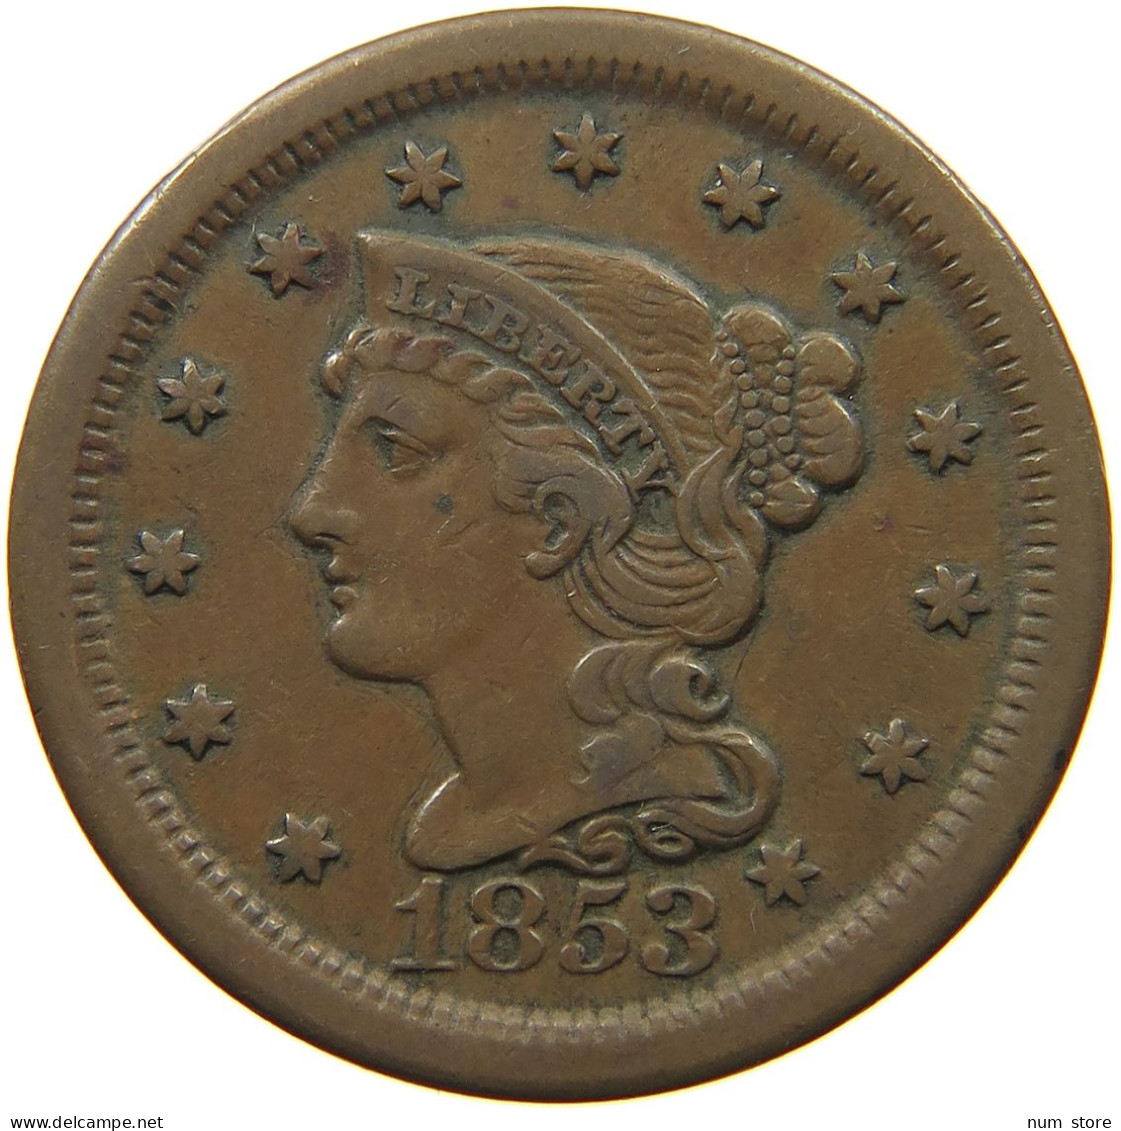 UNITED STATES OF AMERICA LARGE CENT 1853 BRAIDED HAIR #t141 0269 - 1840-1857: Braided Hair (Cheveux Tressés)